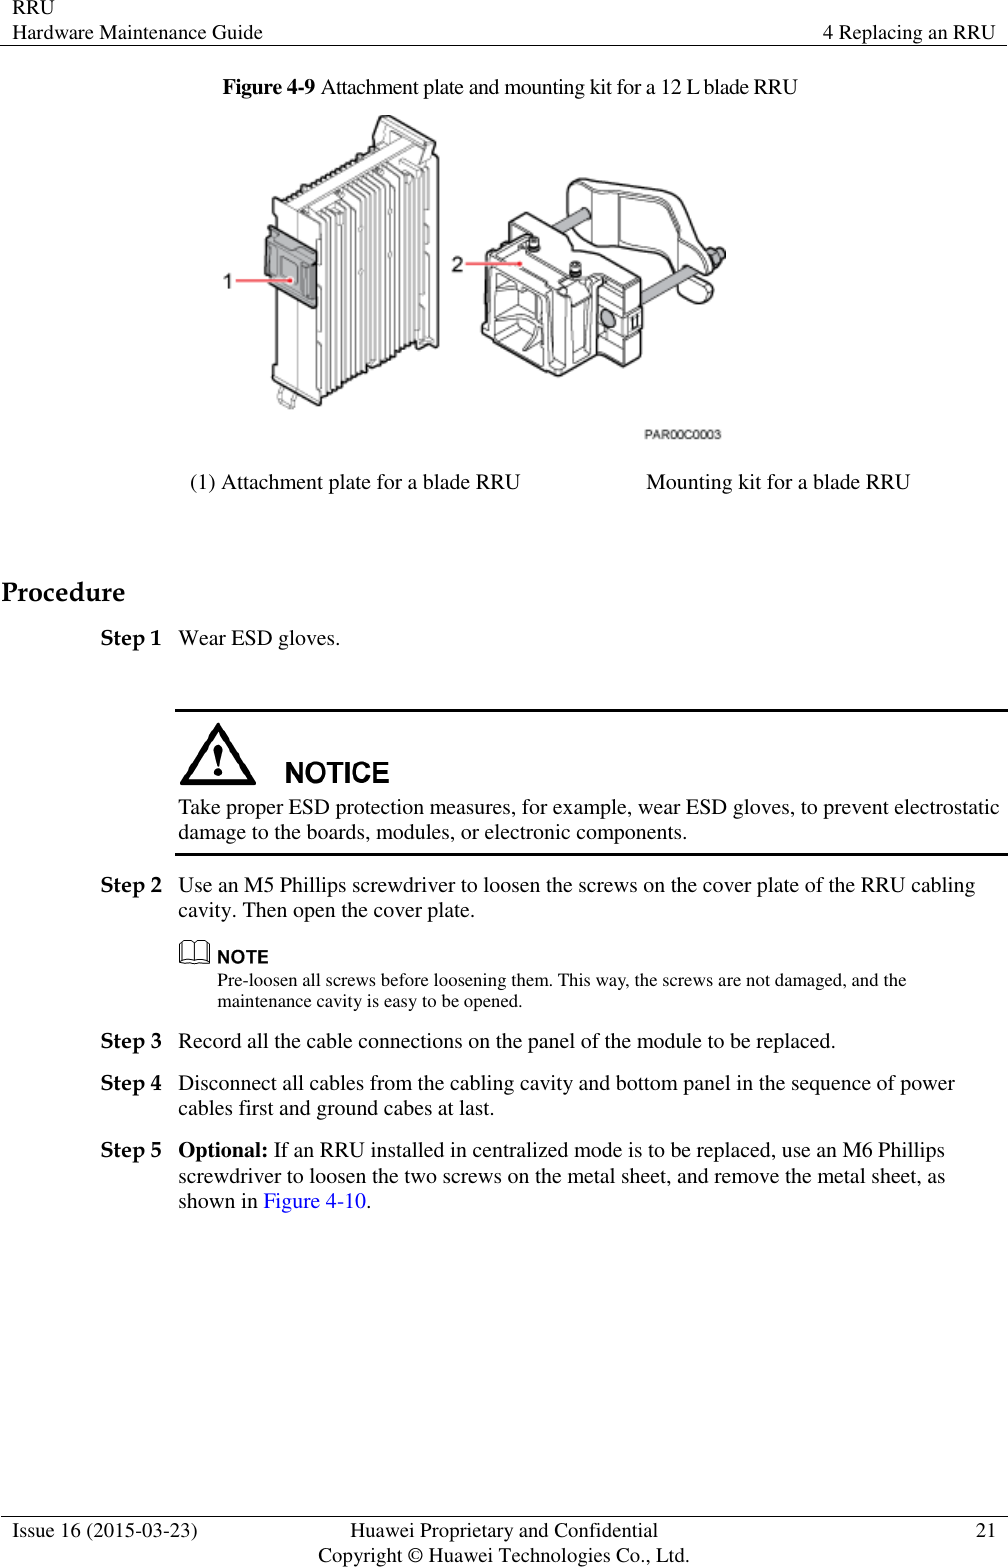 RRU Hardware Maintenance Guide 4 Replacing an RRU  Issue 16 (2015-03-23) Huawei Proprietary and Confidential                                     Copyright © Huawei Technologies Co., Ltd. 21  Figure 4-9 Attachment plate and mounting kit for a 12 L blade RRU  (1) Attachment plate for a blade RRU Mounting kit for a blade RRU  Procedure Step 1 Wear ESD gloves.   Take proper ESD protection measures, for example, wear ESD gloves, to prevent electrostatic damage to the boards, modules, or electronic components. Step 2 Use an M5 Phillips screwdriver to loosen the screws on the cover plate of the RRU cabling cavity. Then open the cover plate.  Pre-loosen all screws before loosening them. This way, the screws are not damaged, and the maintenance cavity is easy to be opened. Step 3 Record all the cable connections on the panel of the module to be replaced.   Step 4 Disconnect all cables from the cabling cavity and bottom panel in the sequence of power cables first and ground cabes at last. Step 5 Optional: If an RRU installed in centralized mode is to be replaced, use an M6 Phillips screwdriver to loosen the two screws on the metal sheet, and remove the metal sheet, as shown in Figure 4-10. 